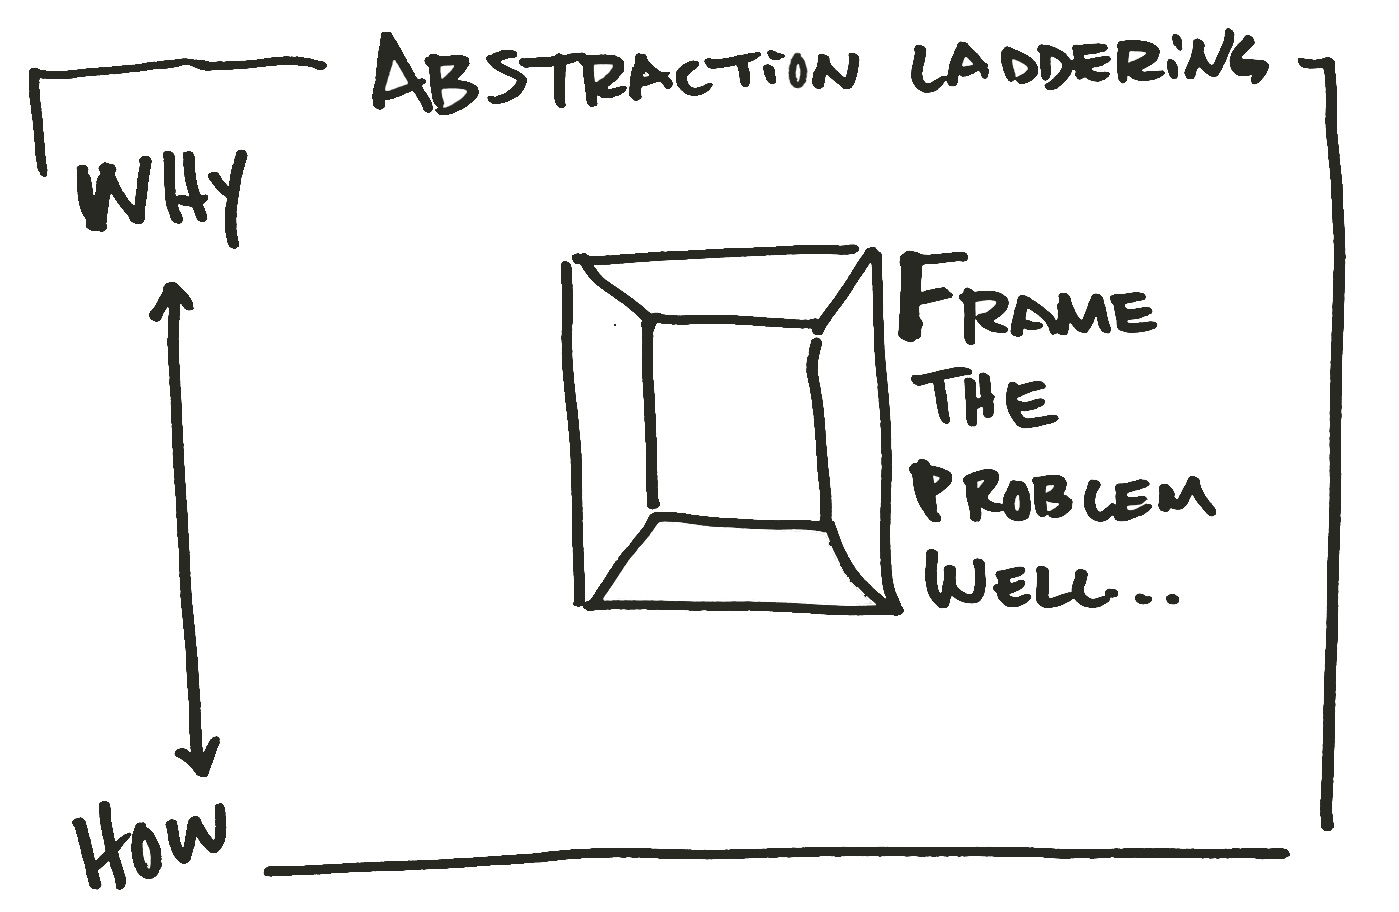 Abstraction Laddering